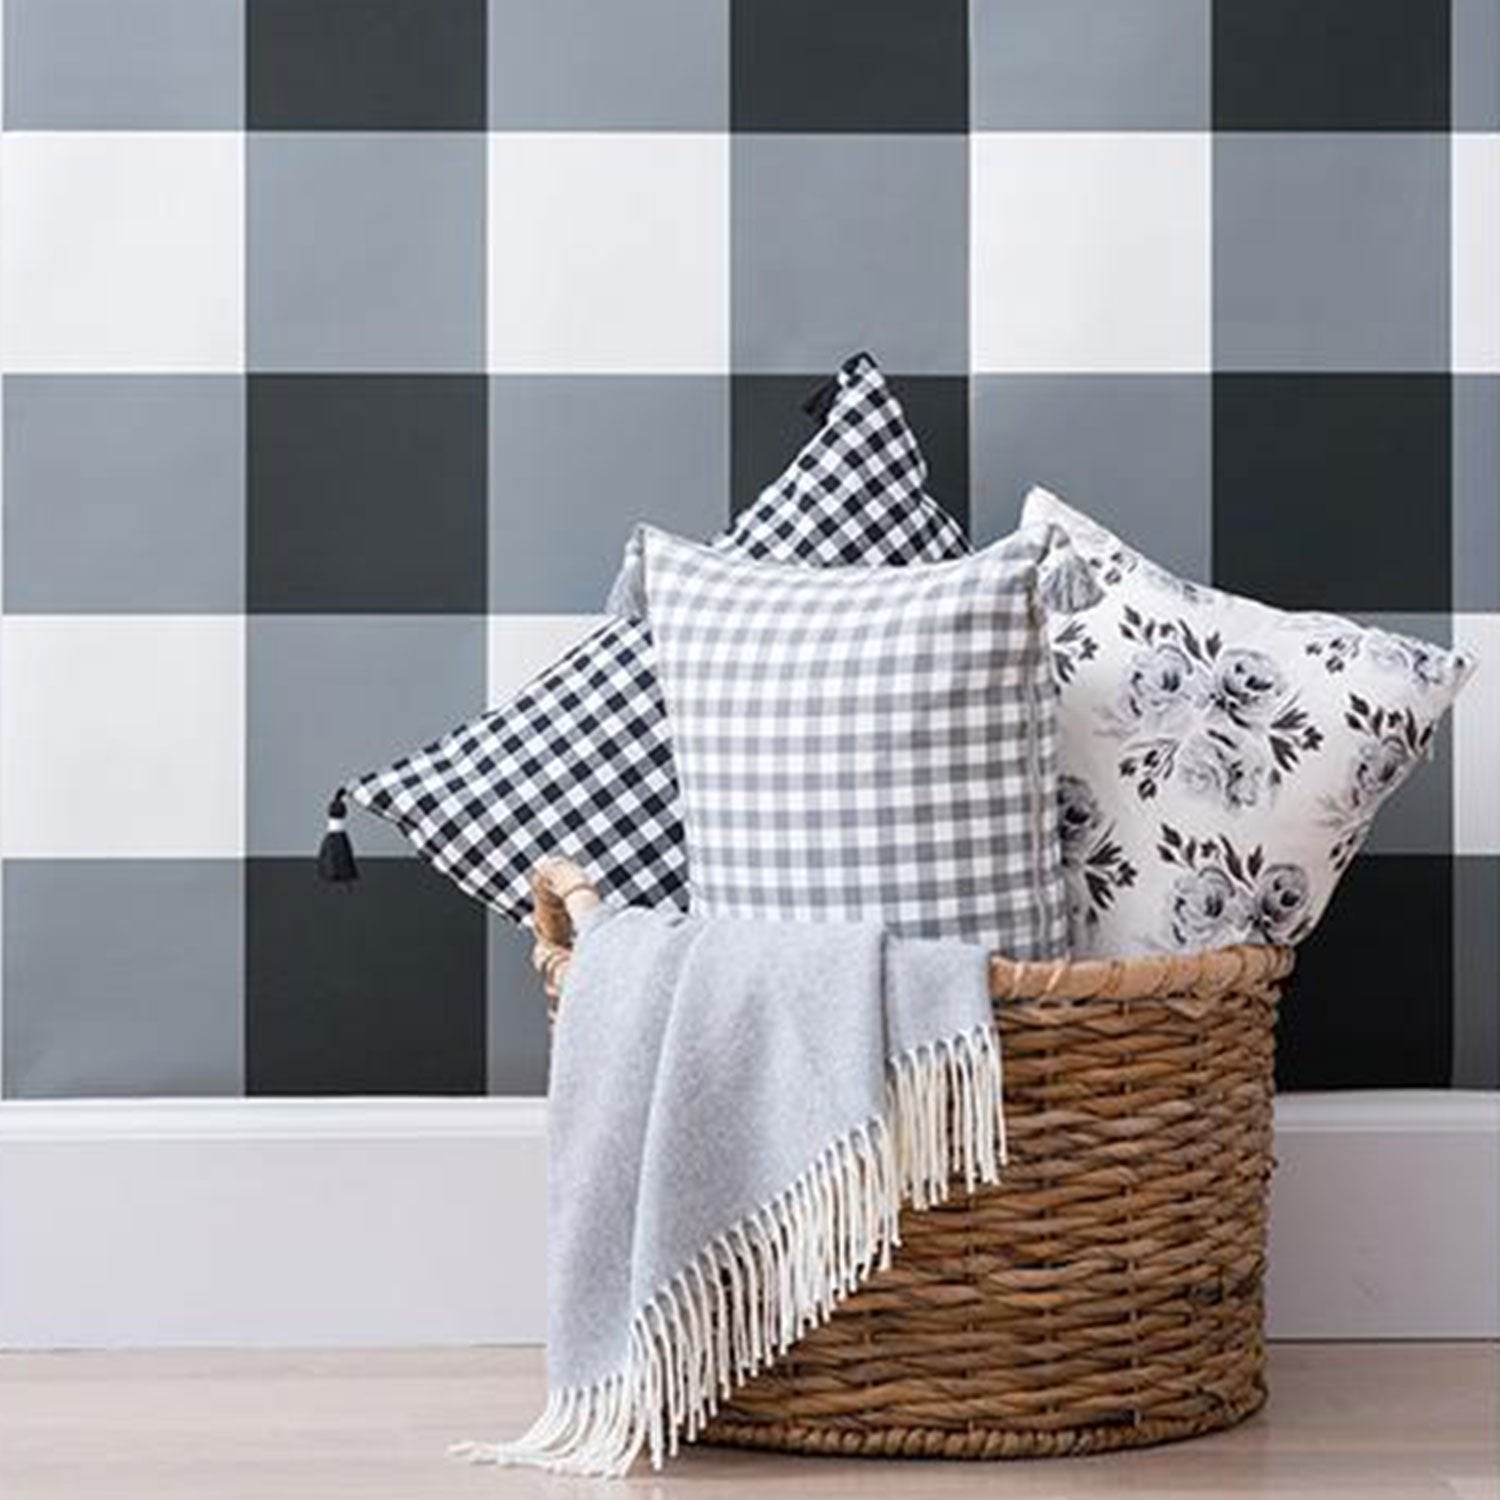 Grey Gingham Pillow with Tassels in Basket